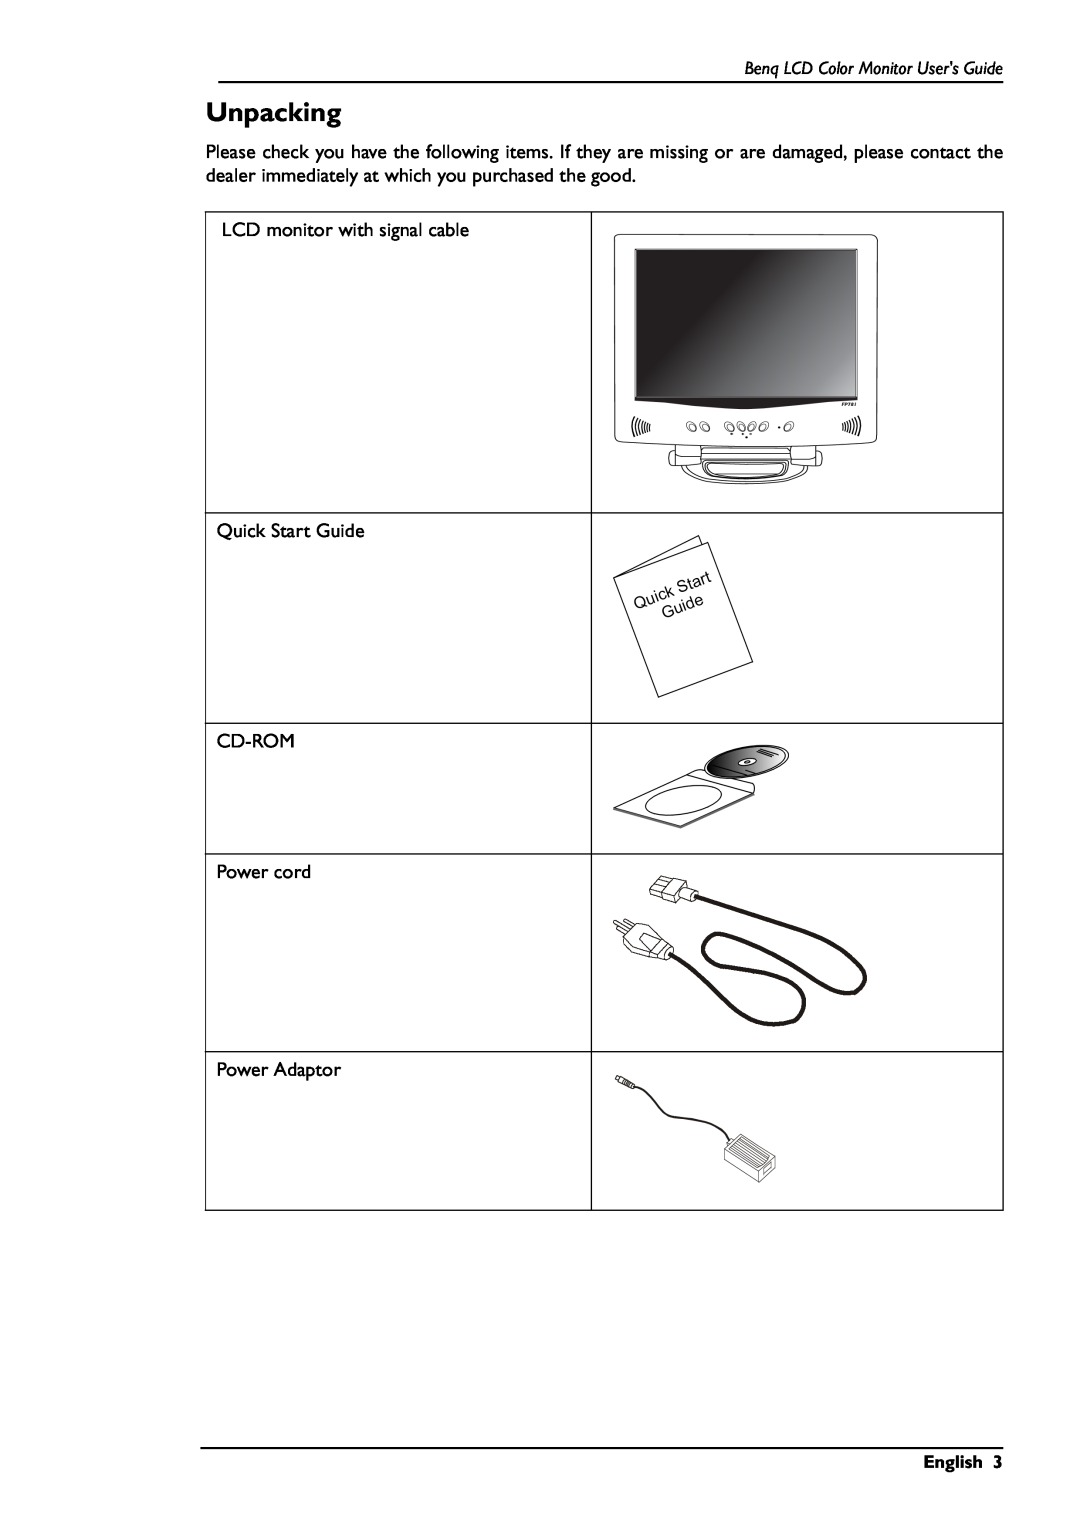 BenQ FP781 Unpacking, Quick Start Guide, Cd-Rom, Power cord, Power Adaptor, Benq LCD Color Monitor Users Guide, English 